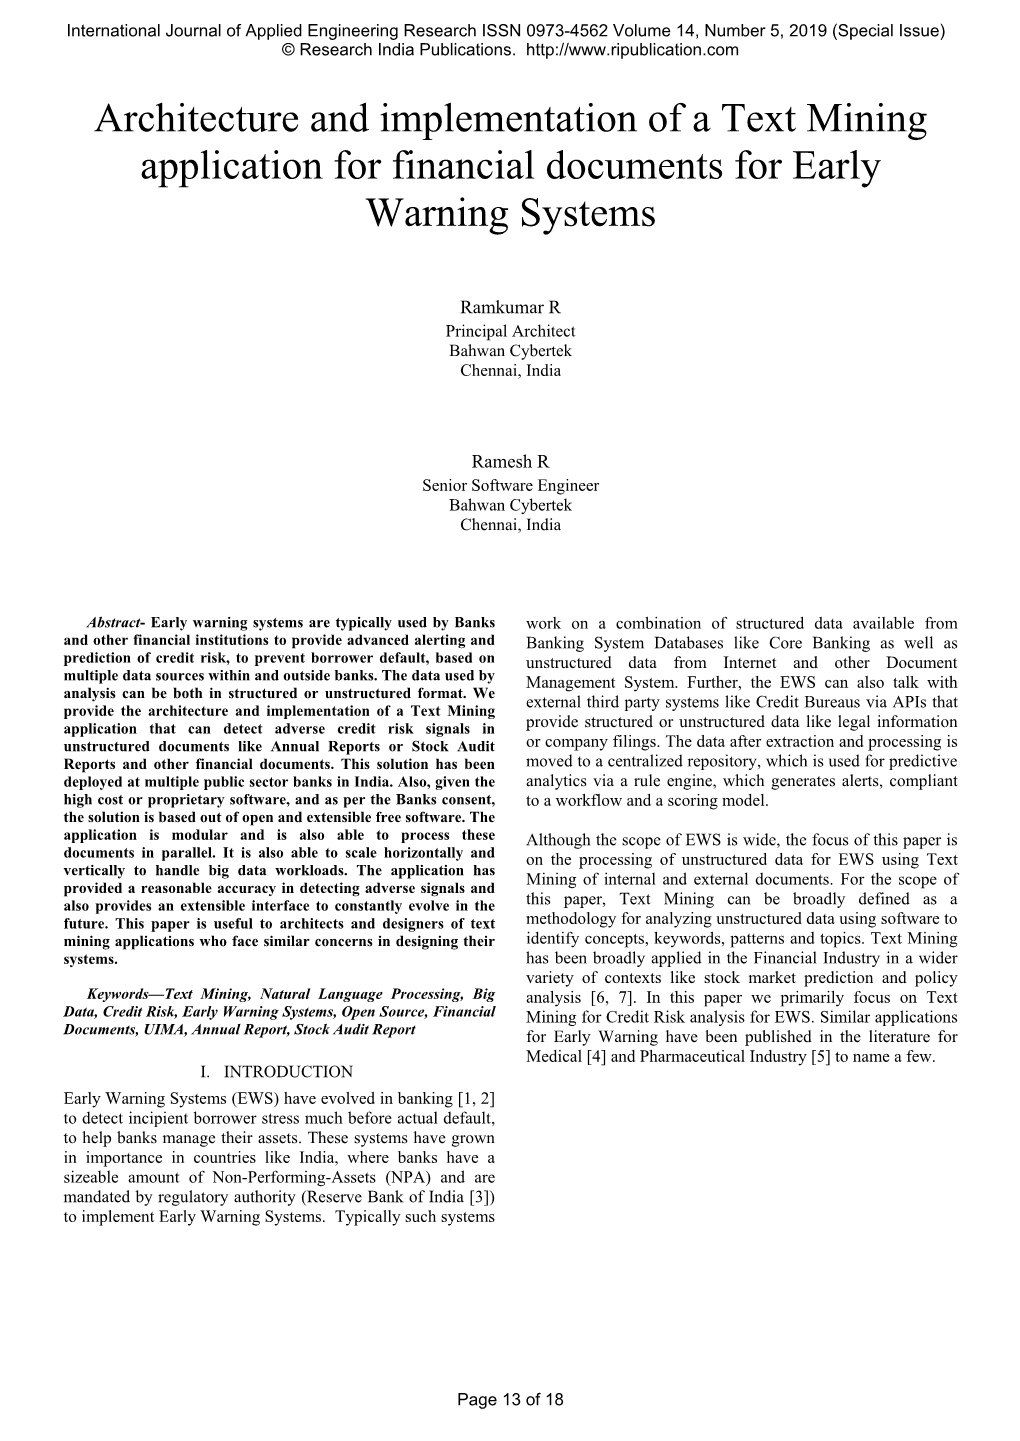 Architecture and Implementation of a Text Mining Application for Financial Documents for Early Warning Systems